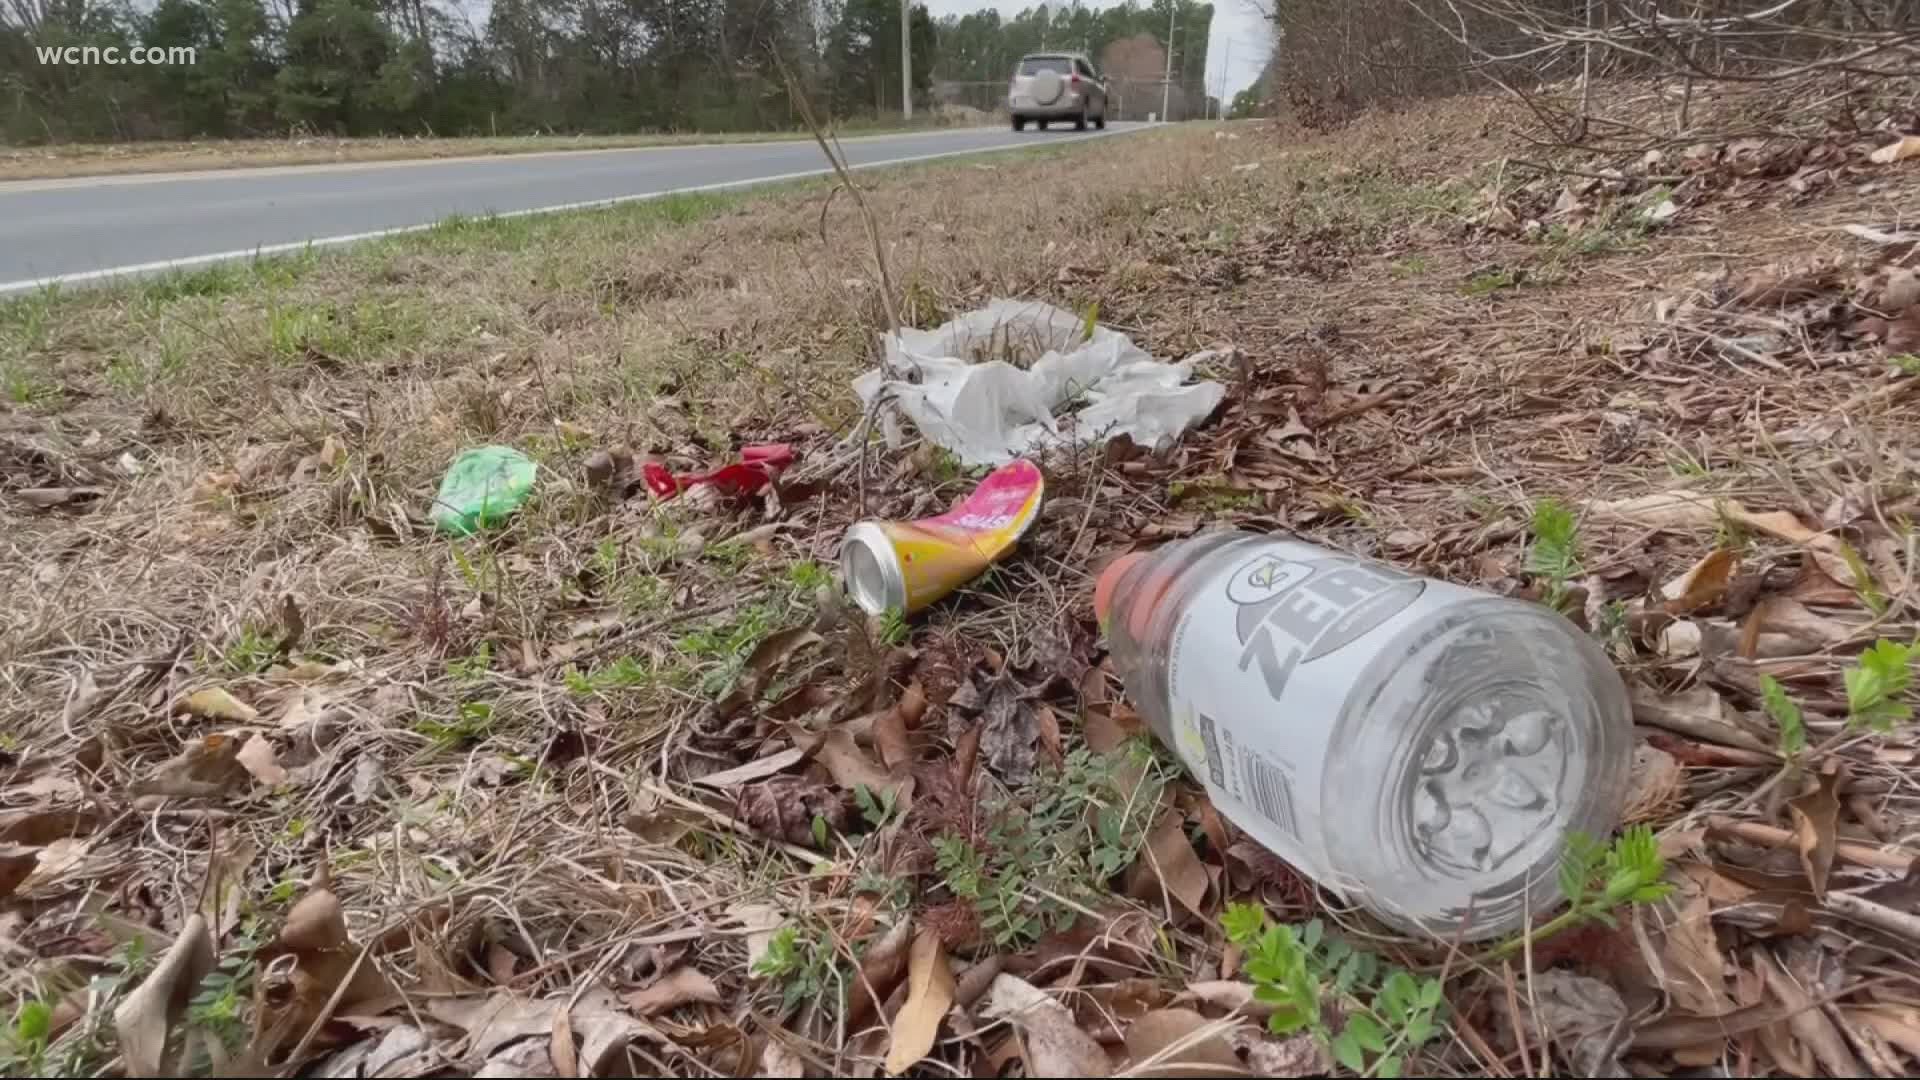 Drivers across the Charlotte area are fed up with all the litter along highways. It's everywhere and they want the state to do something about the mess.